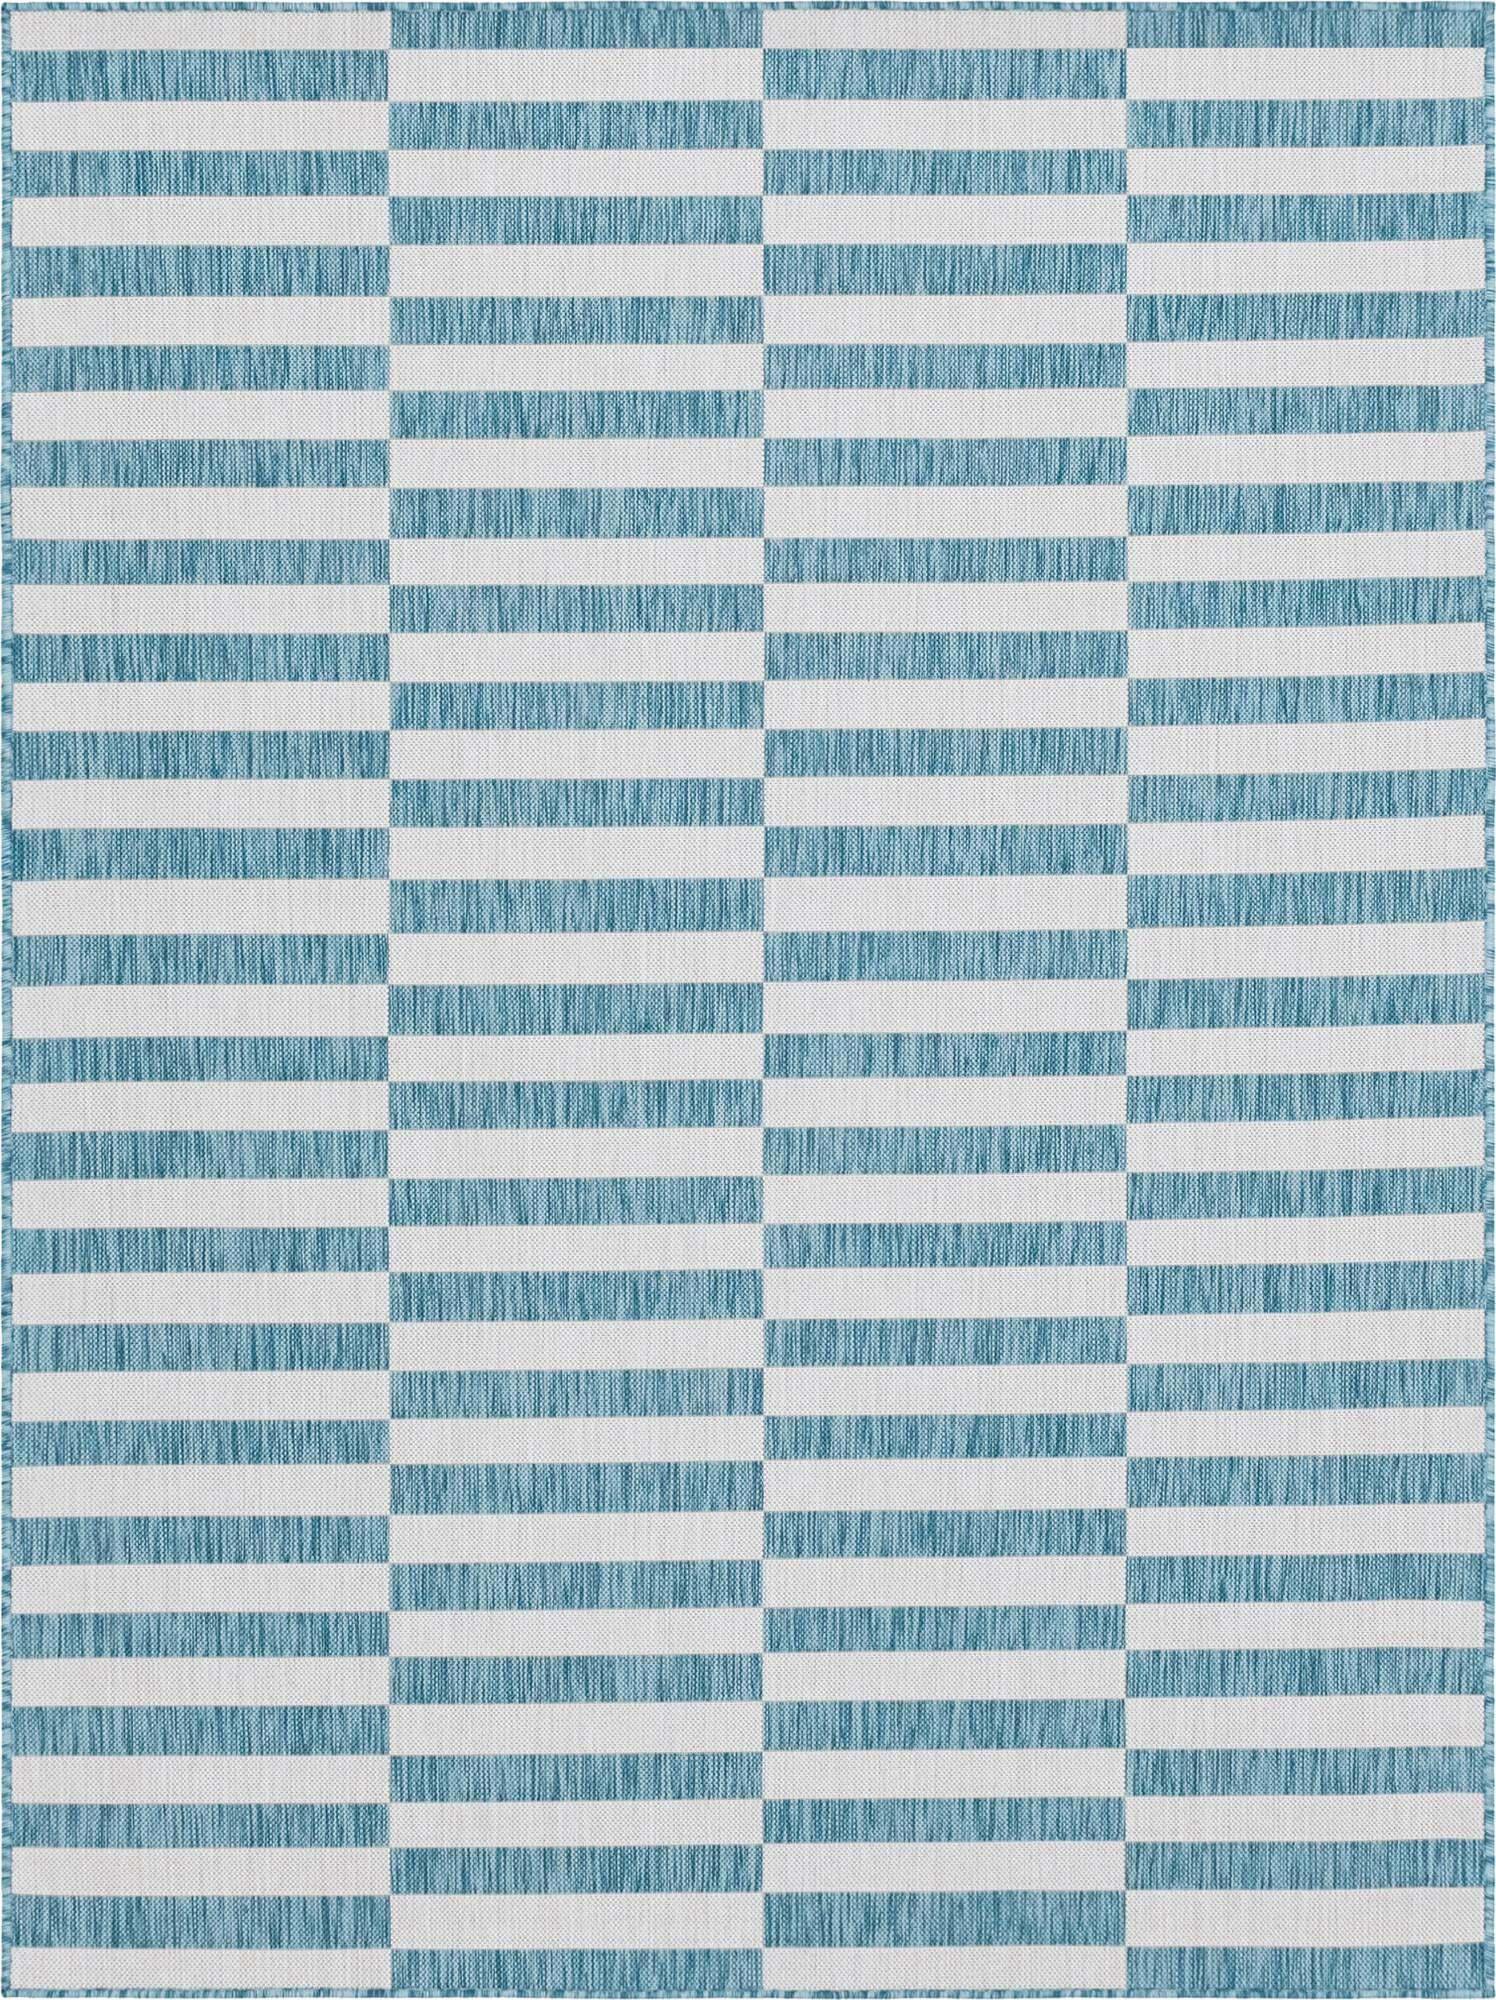 Unique Loom Outdoor Rugs - Outdoor Striped Geometric Rectangular 9x12 Rug Blue & Ivory